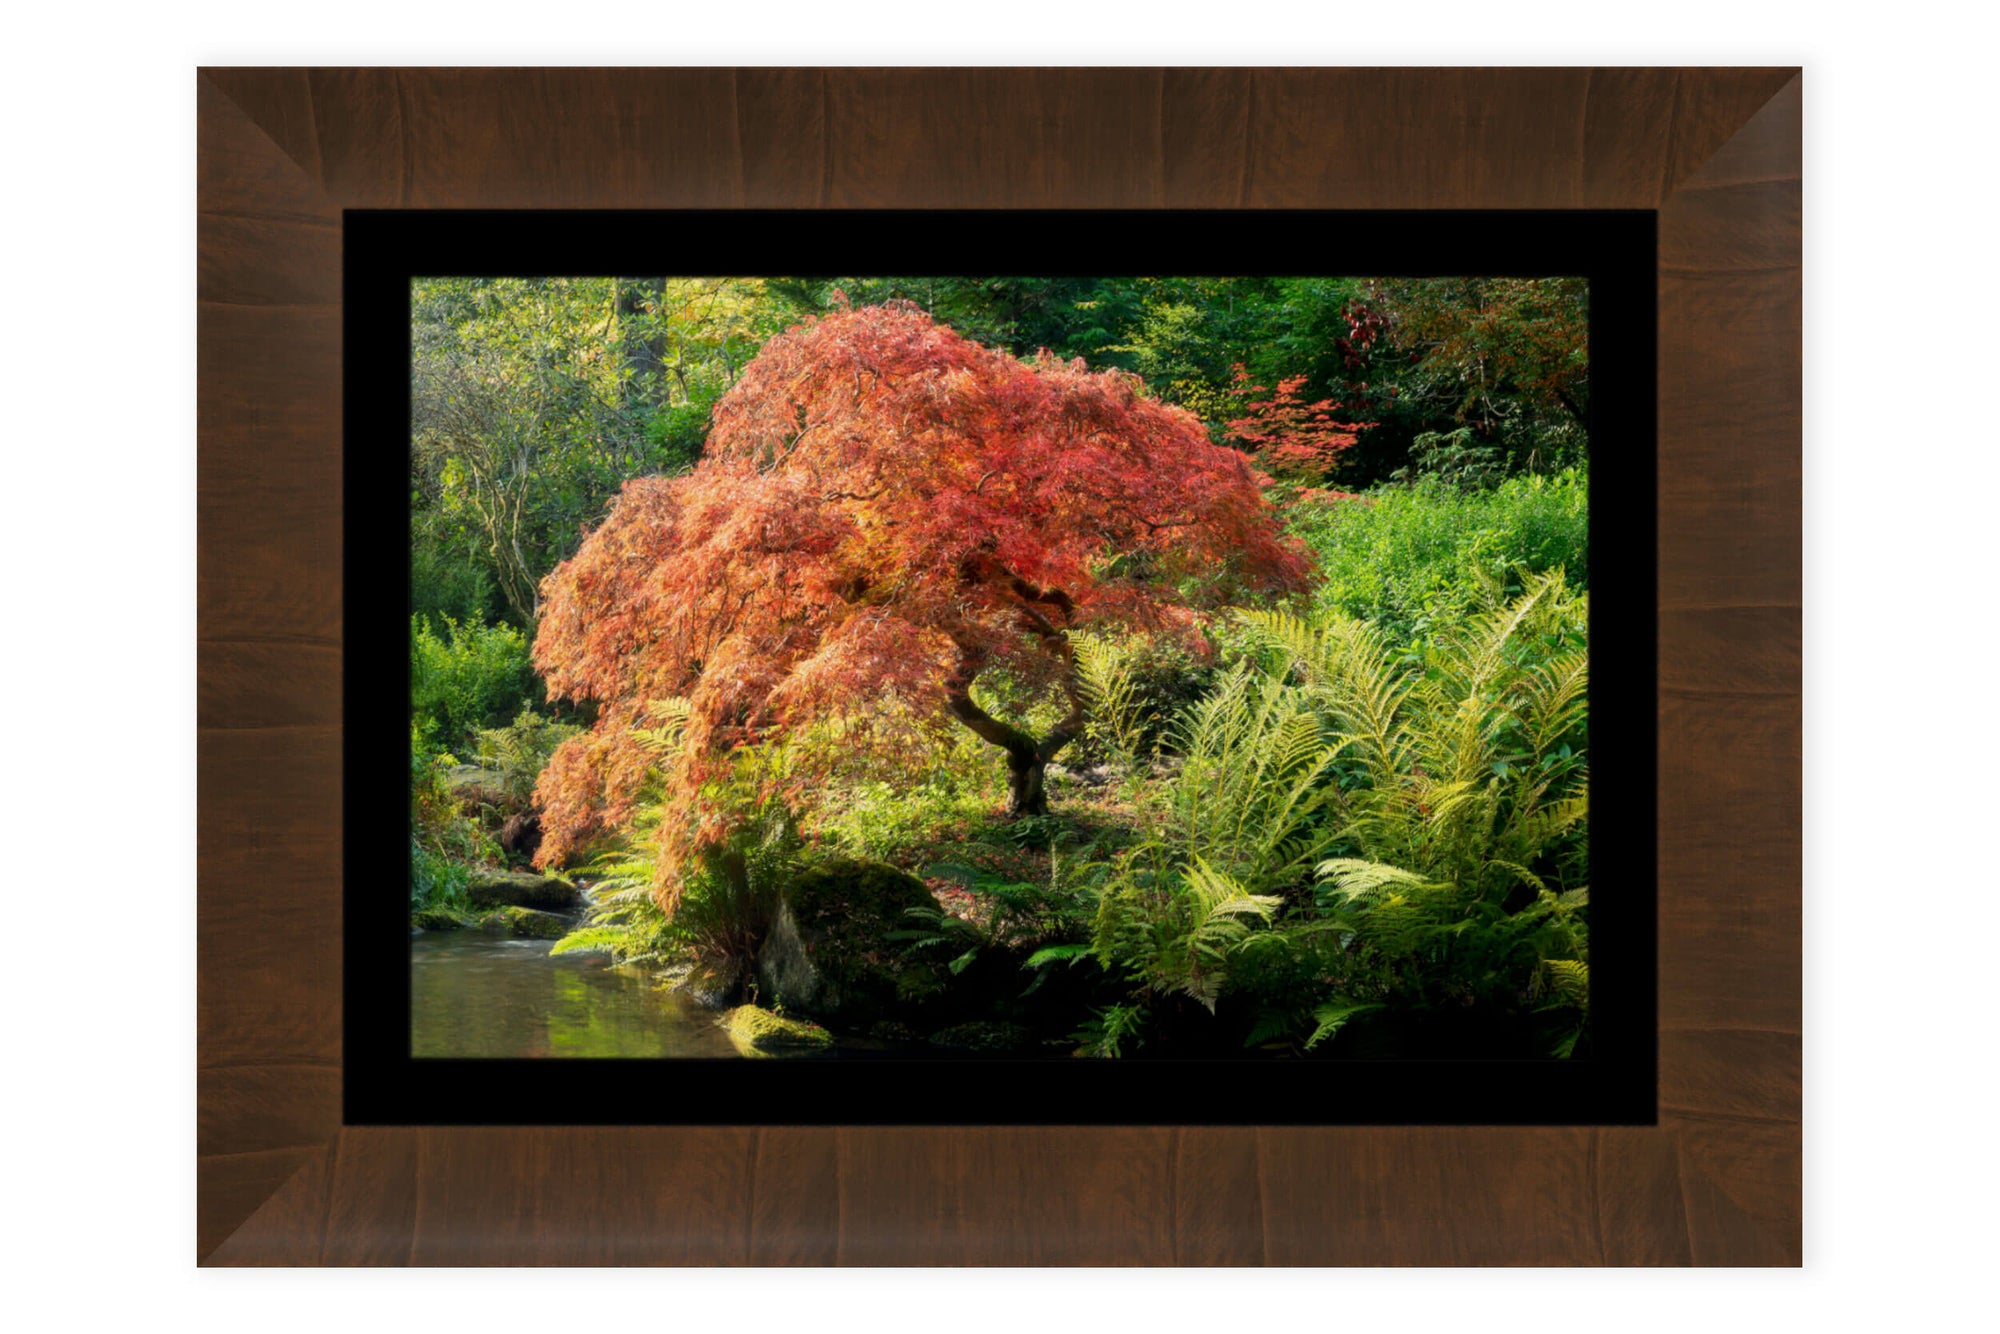 A framed picture of a Japanese maple tree during peak fall colors at Kubota Garden in Seattle.